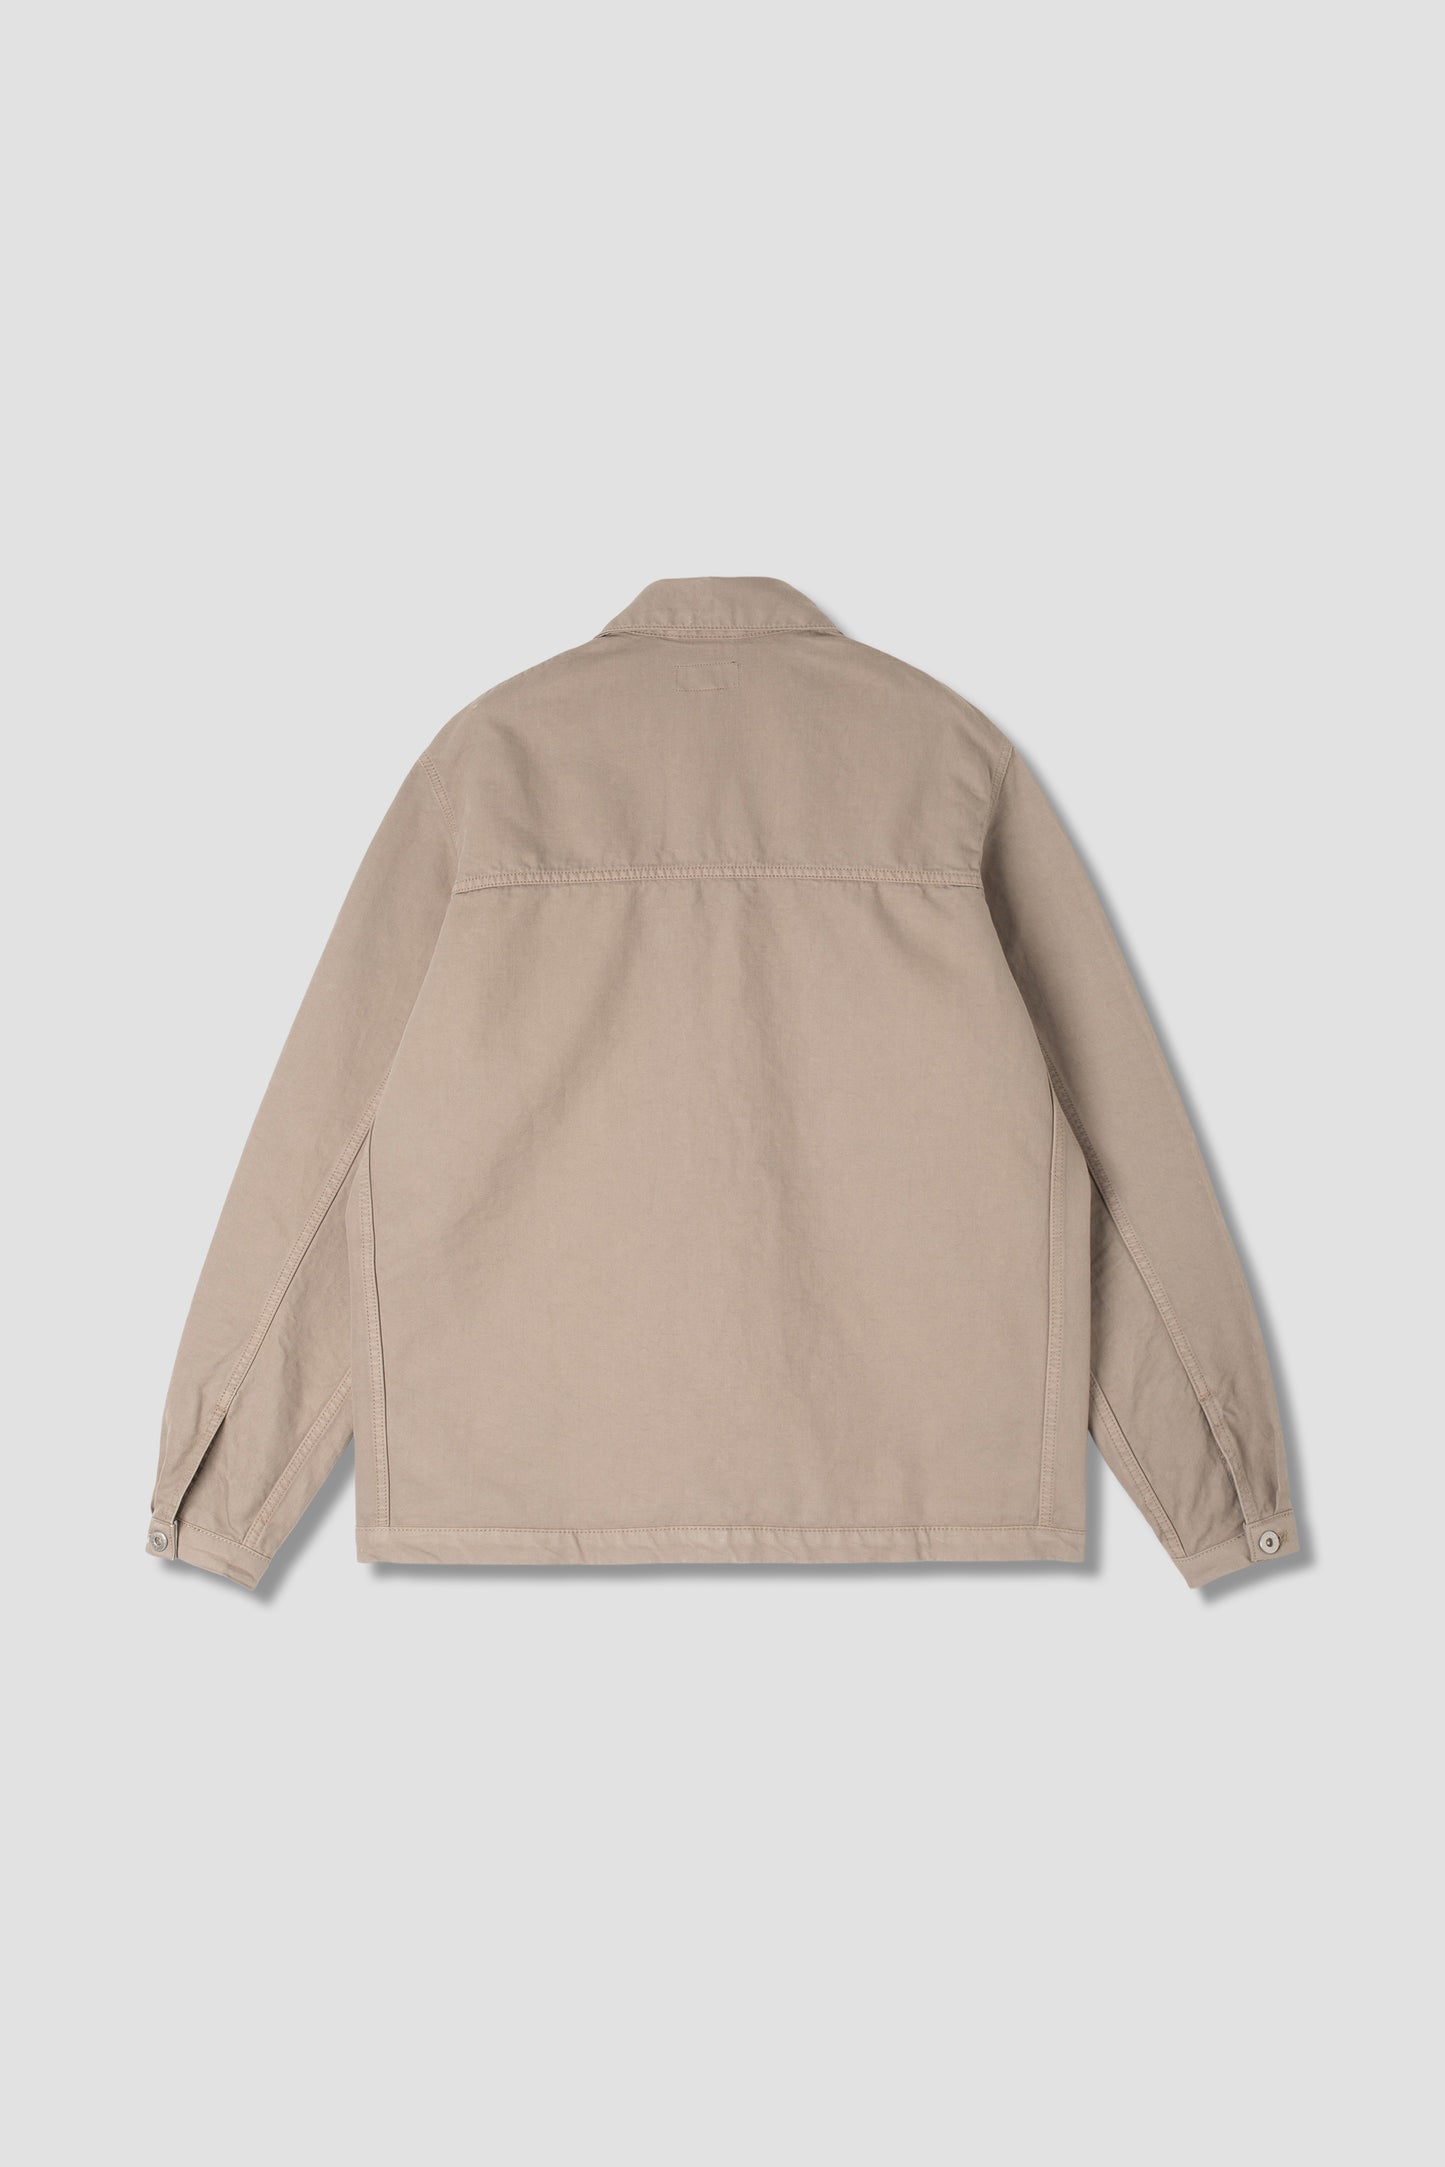 Coverall Jacket, Unlined (Dusk Twill)